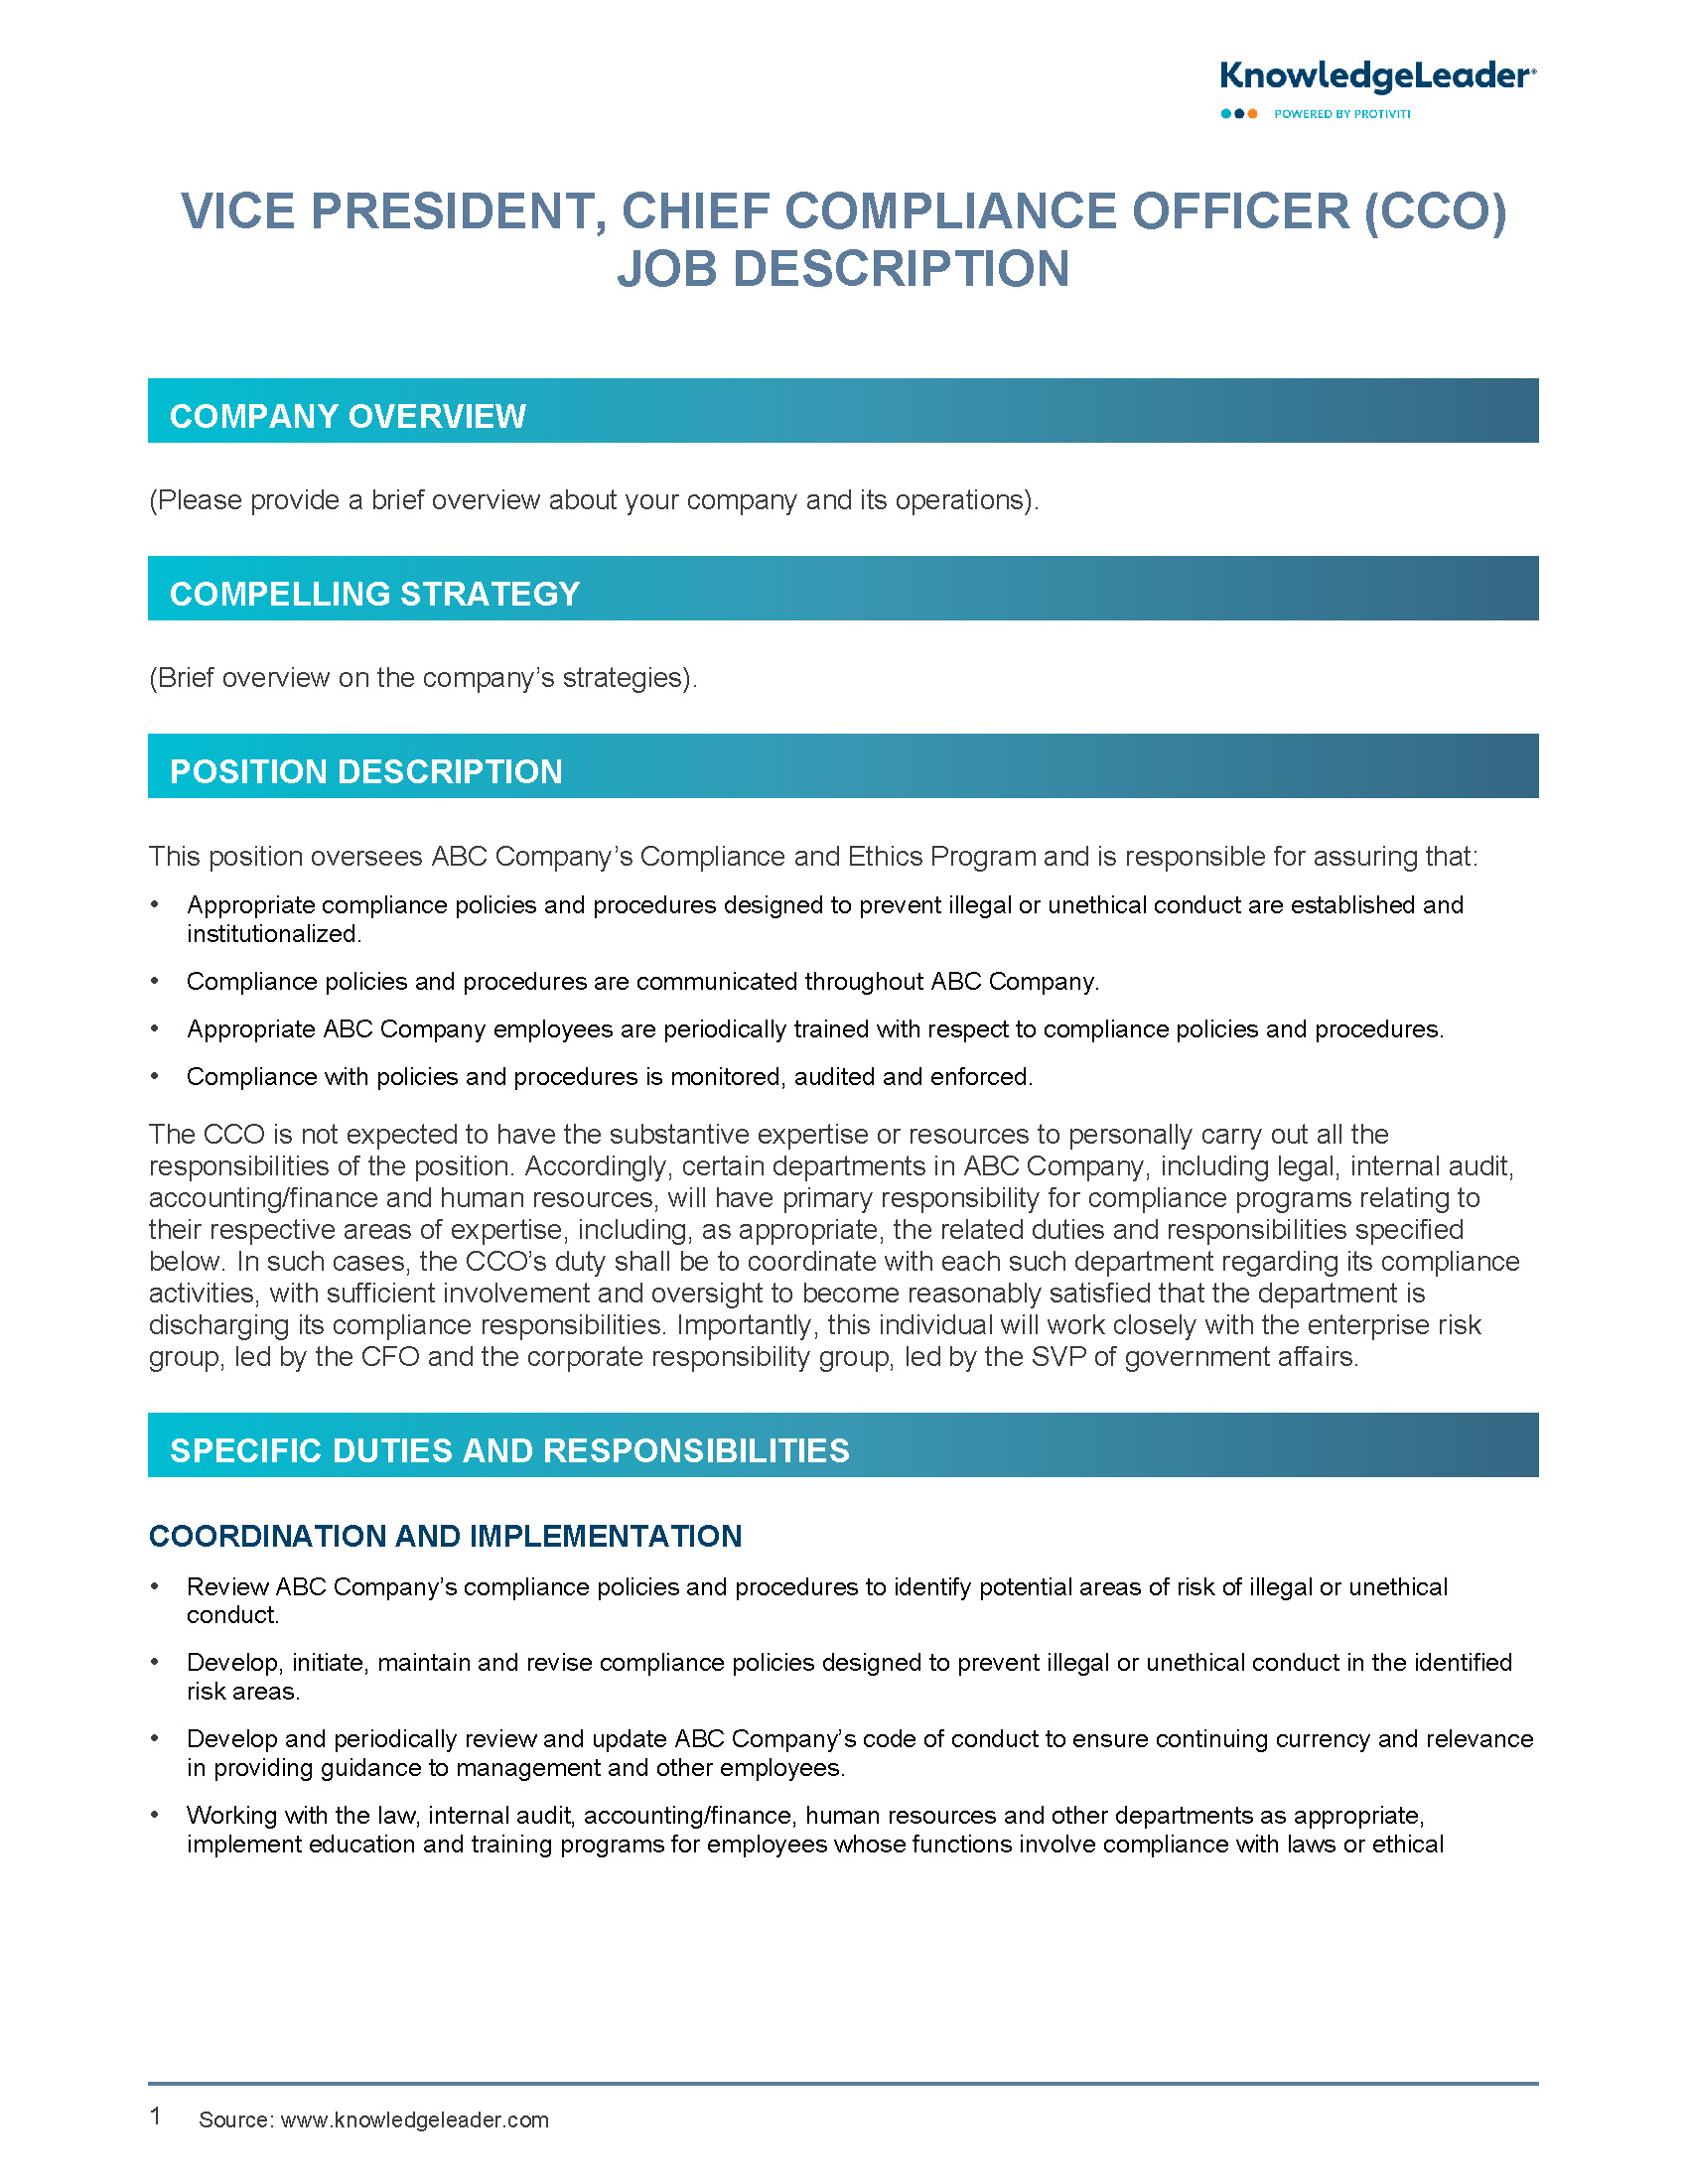 Screenshot of the first page of Vice President, Chief Compliance Officer Job Description